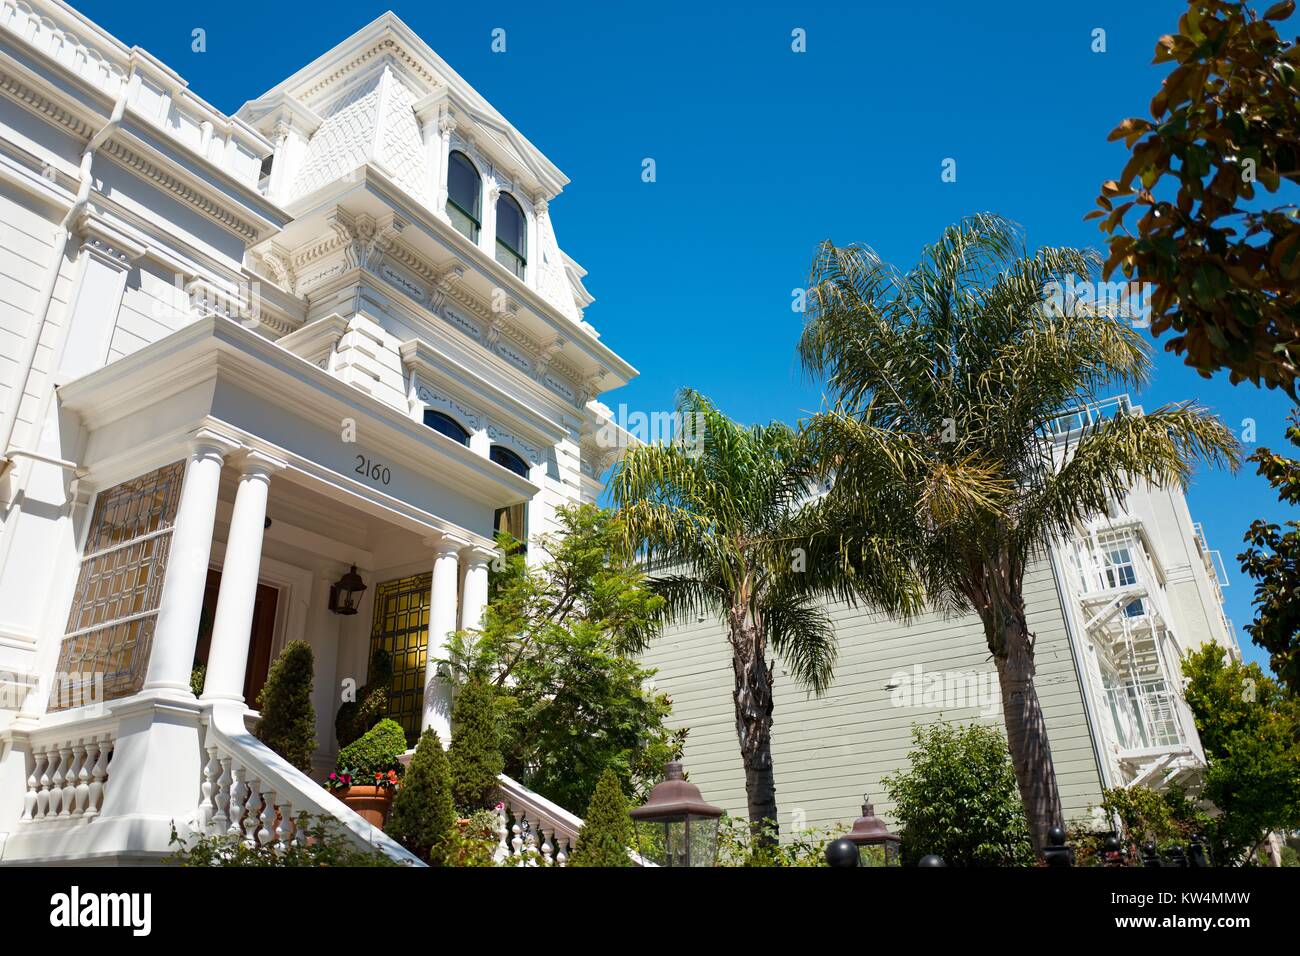 Elegant white Victorian style mansion, with palm trees, on a sunny day in the Cow Hollow neighborhood of San Francisco, California, August 28, 2016. Stock Photo